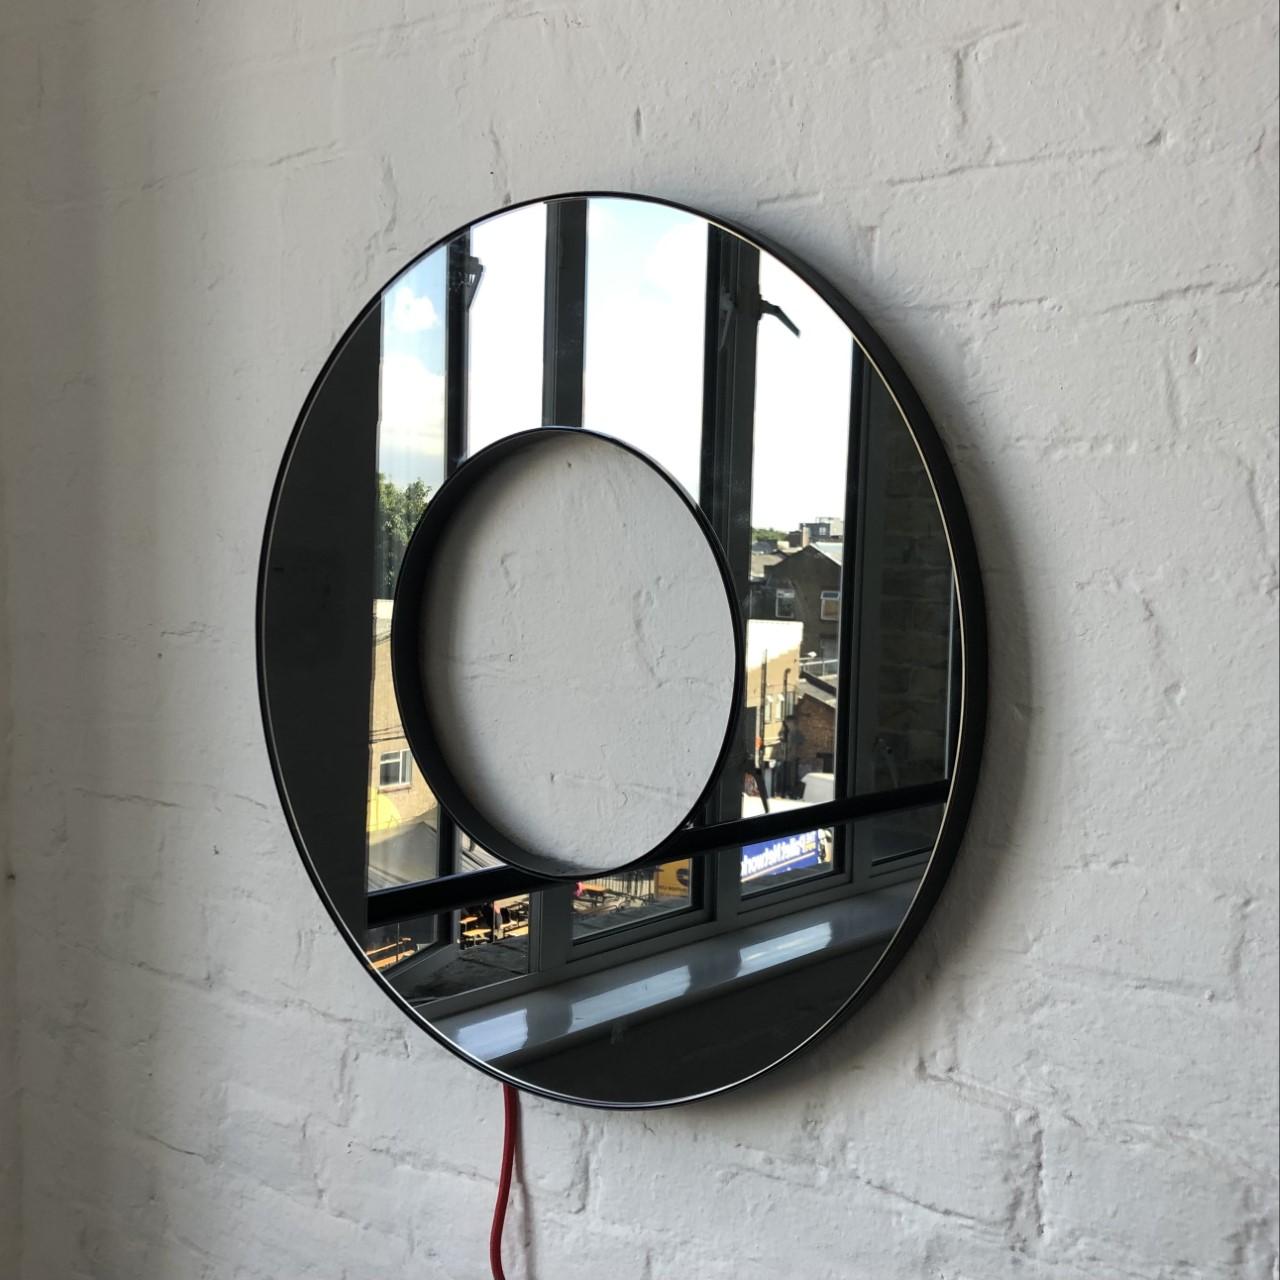 Donut Round Black Tinted Customisable Mirror with Back Illumination, Large In New Condition For Sale In London, GB